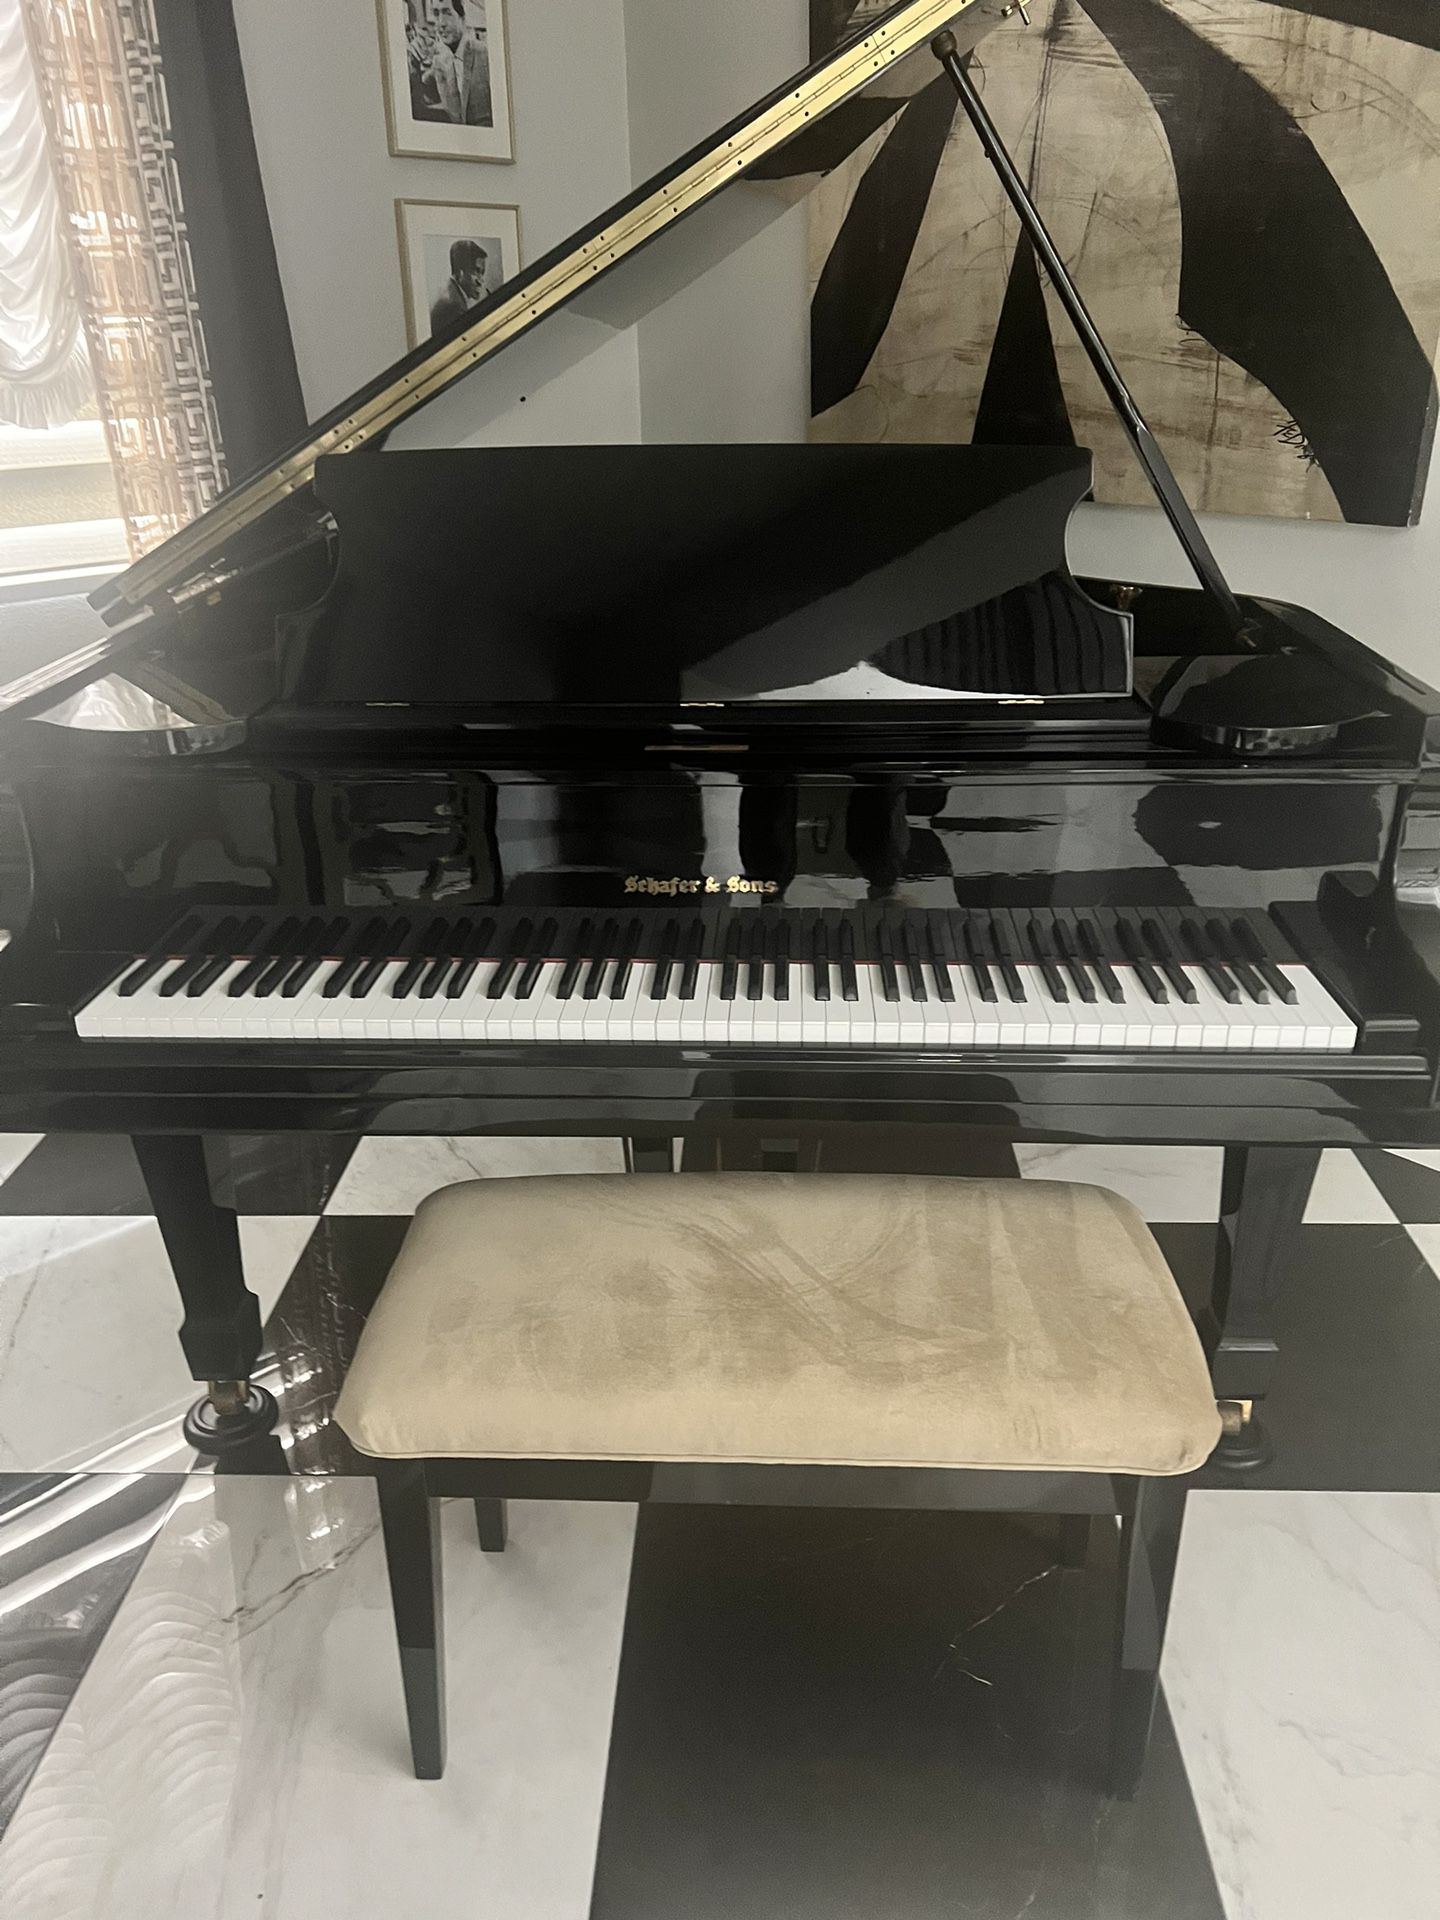 Schaefer And Sons Baby Grand Piano 